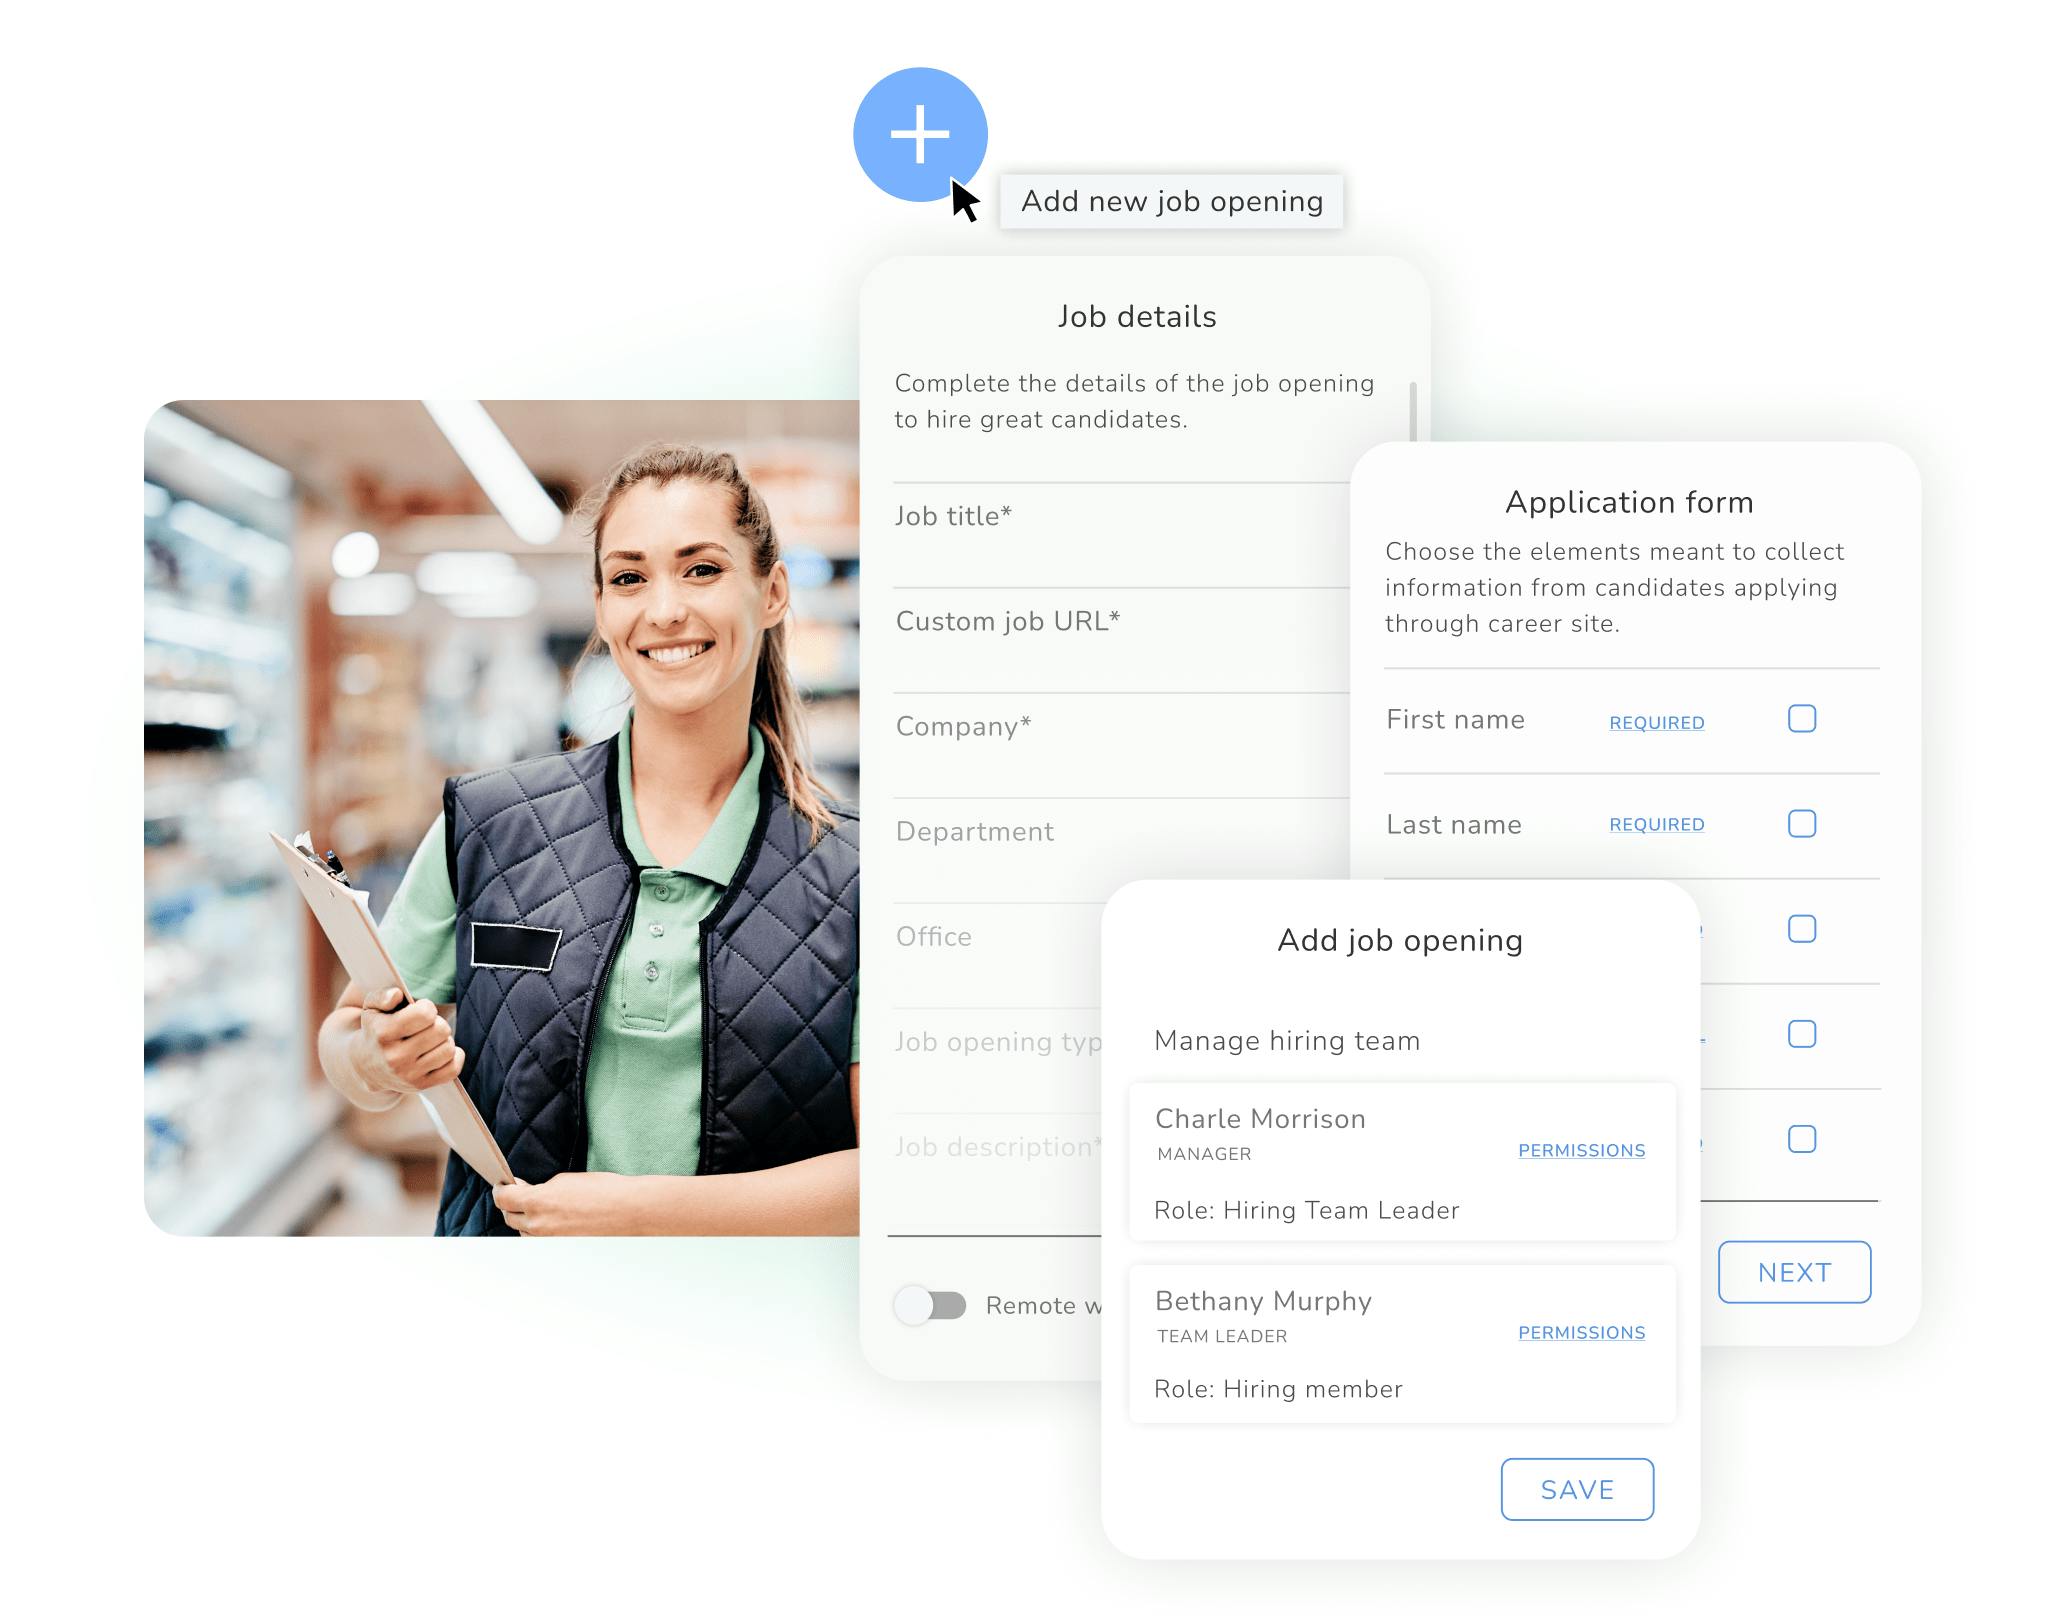 Retail Applications of Workforce Management Technology